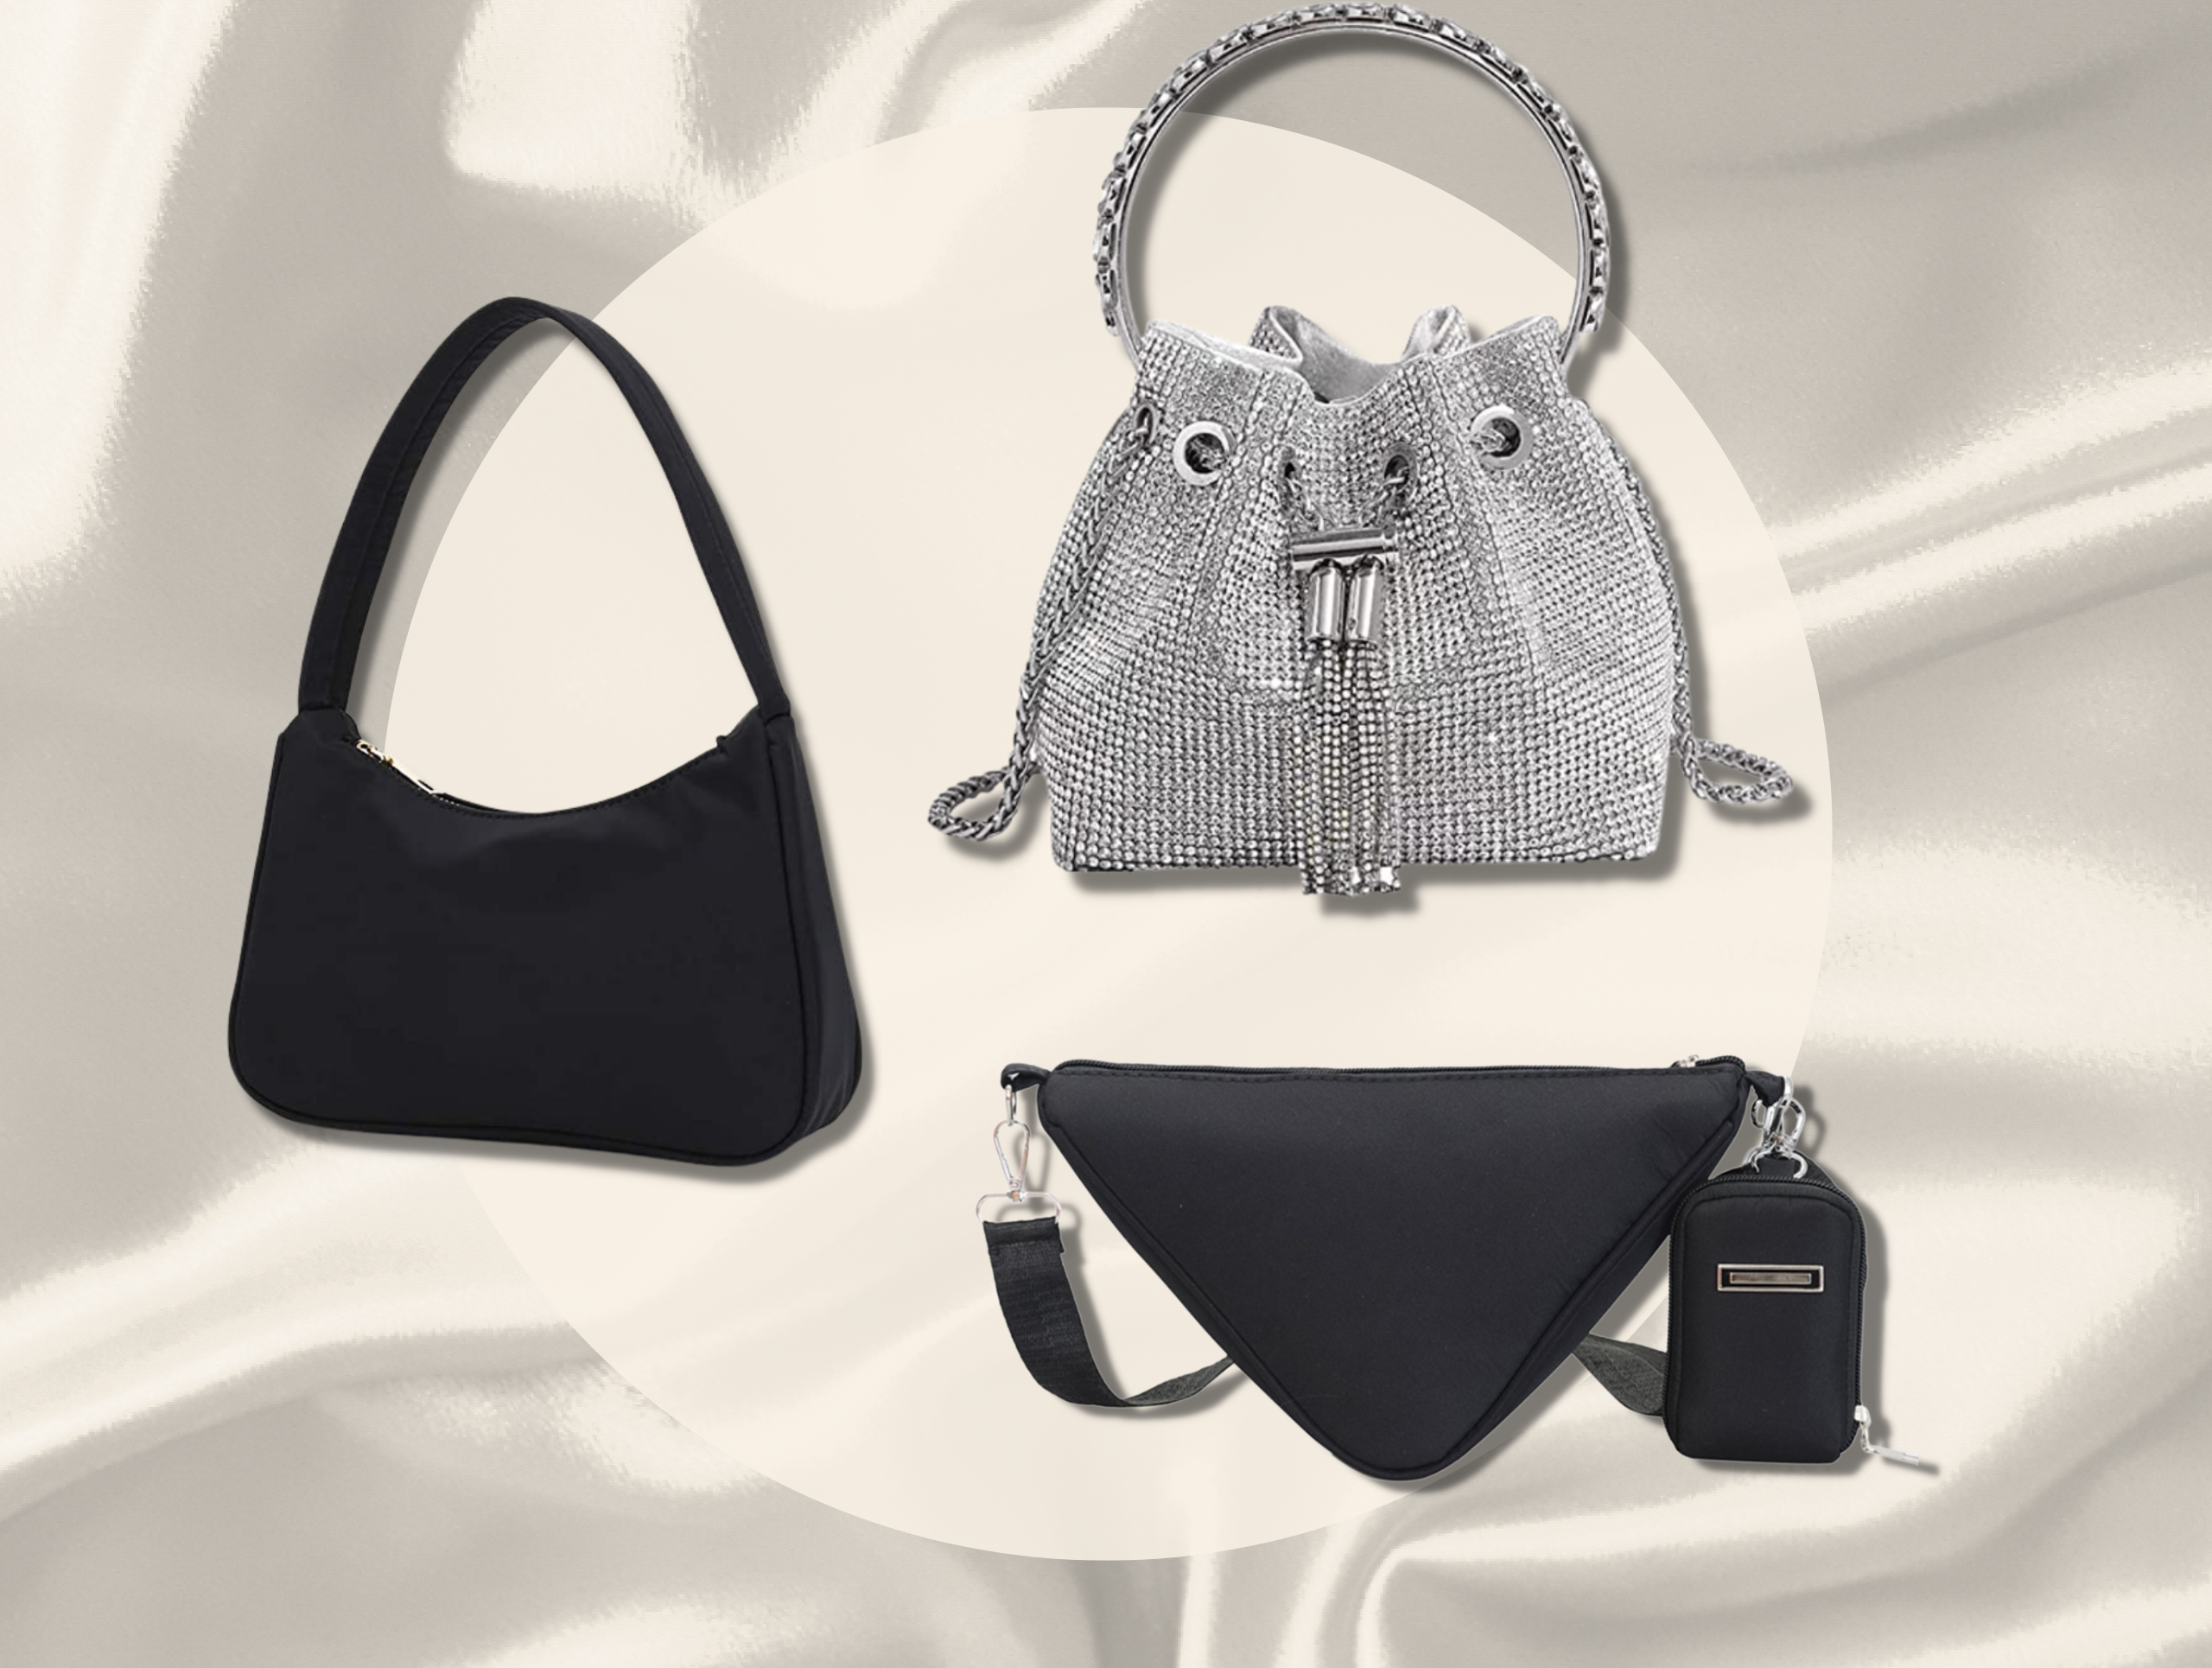 8 Prada Bag Dupes to Get The Luxury Look On a Budget